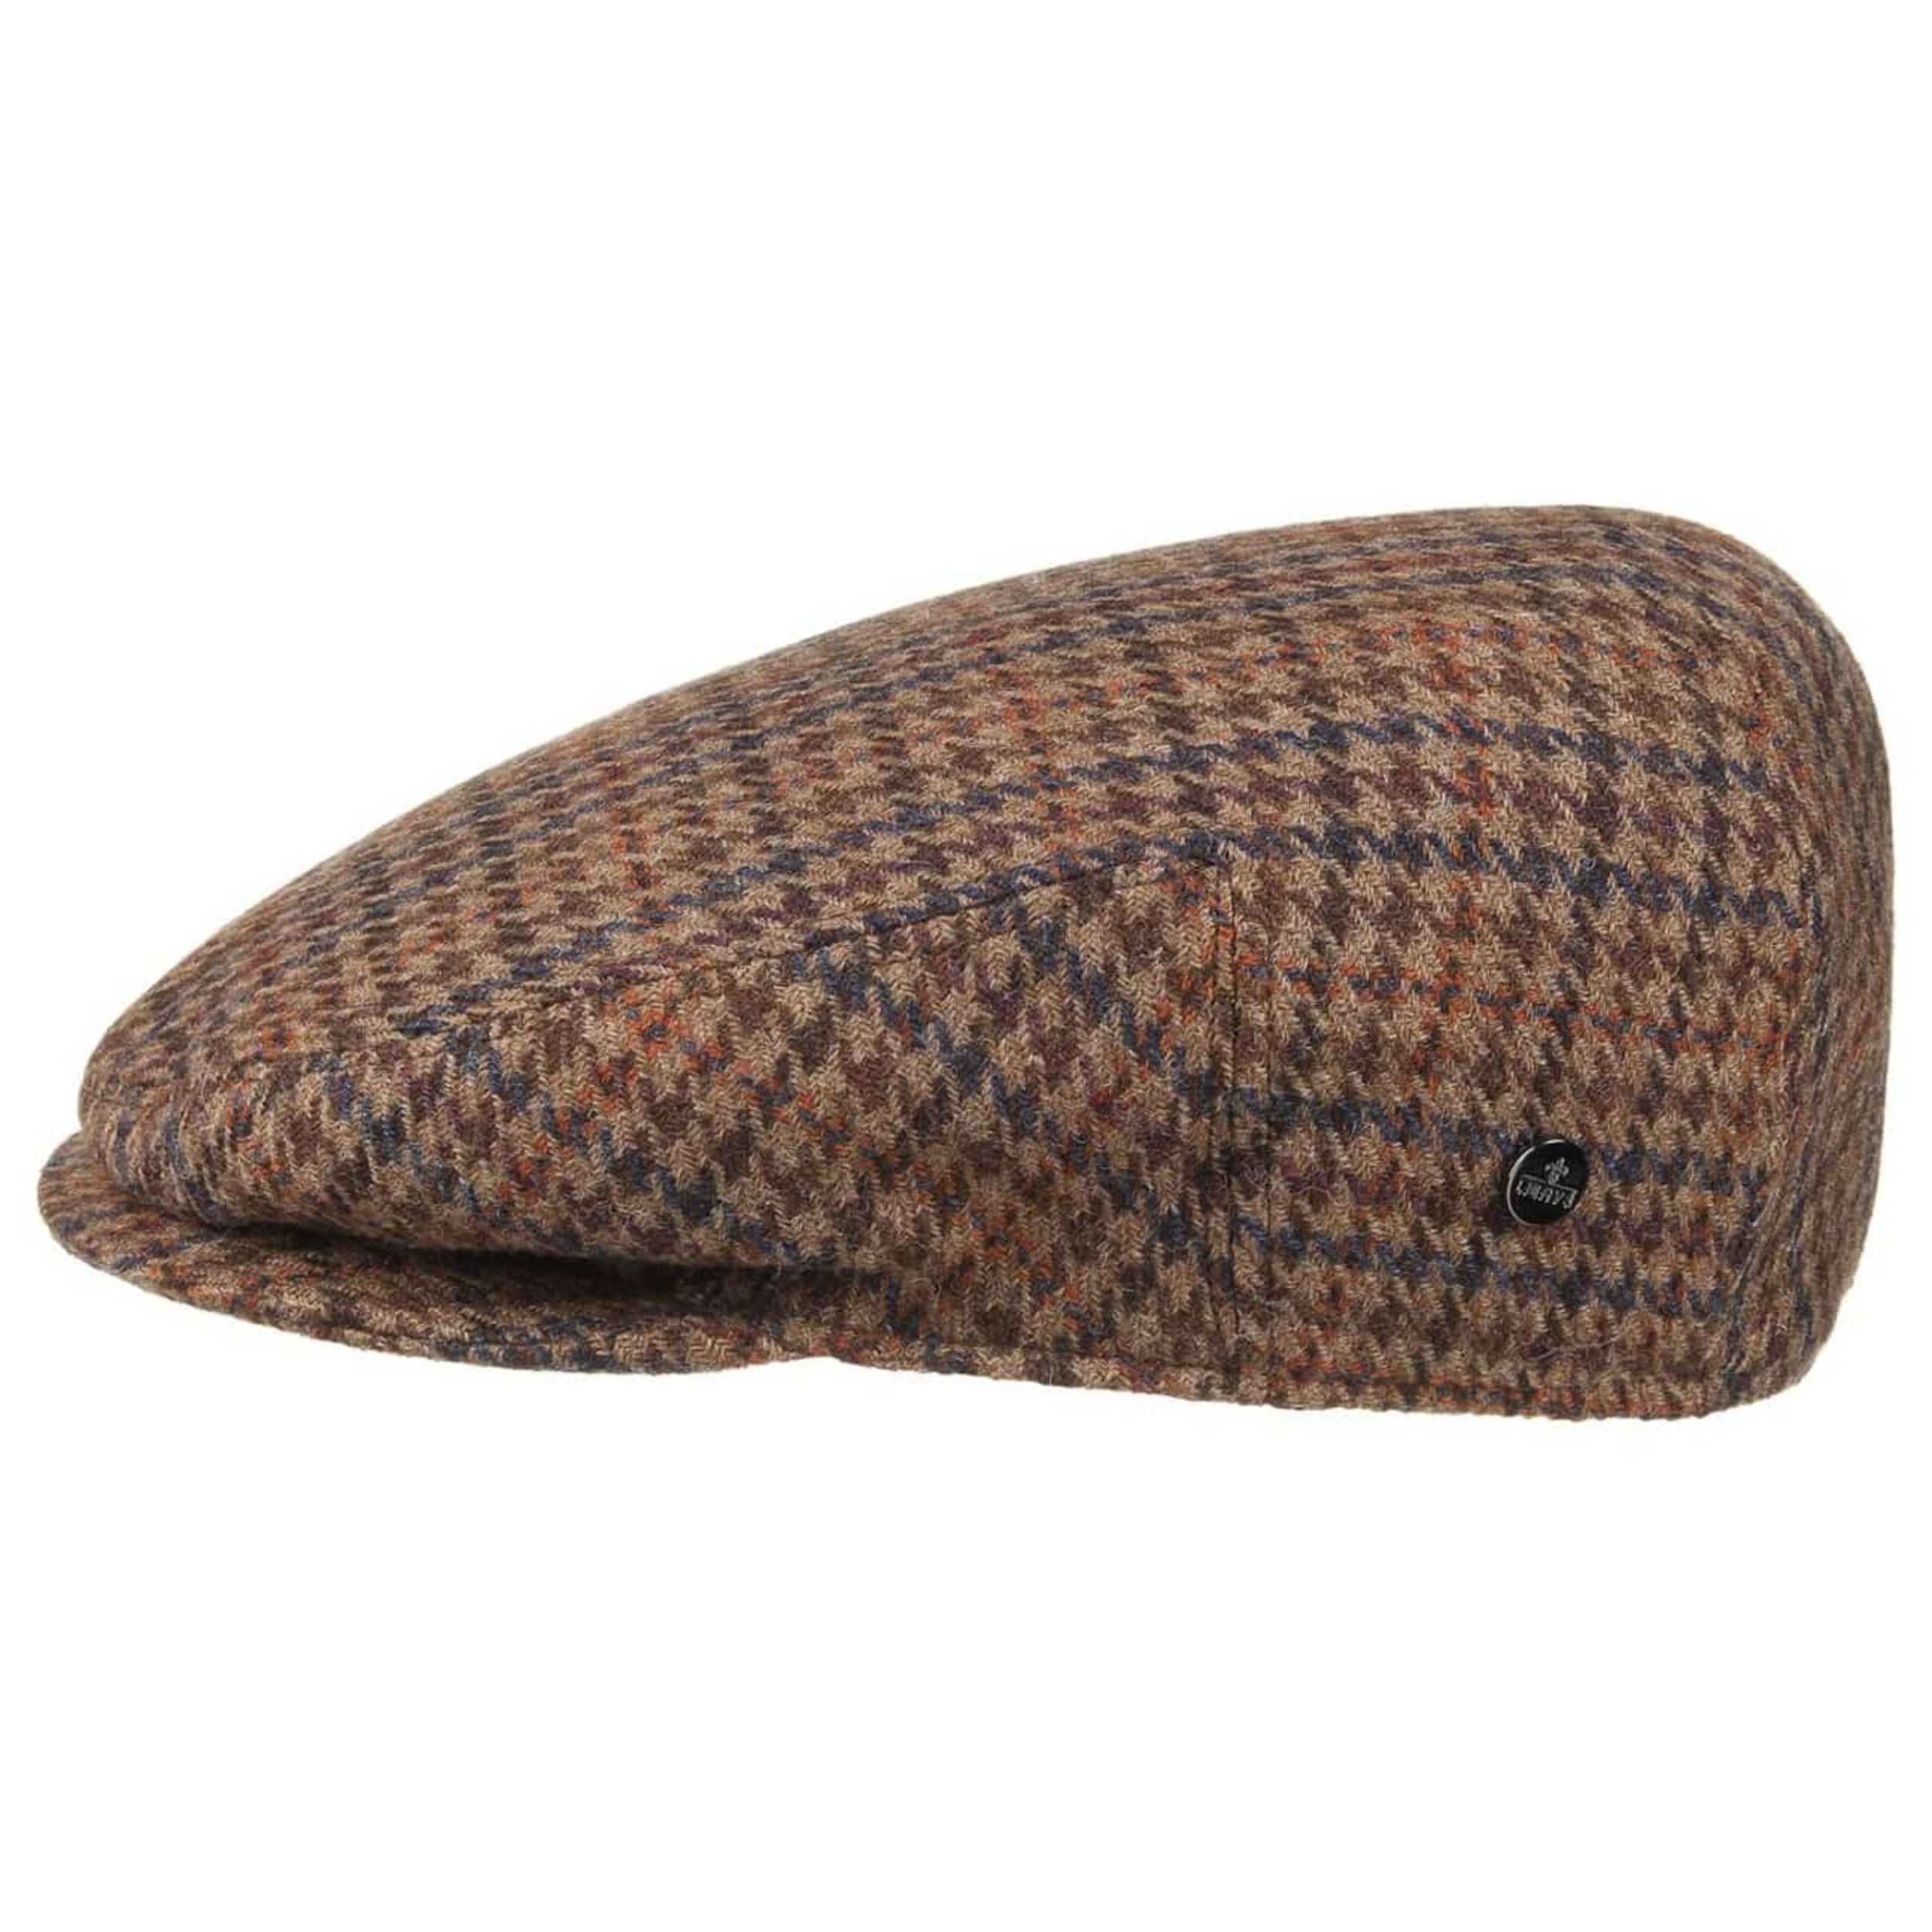 Inglese Houndstooth Flat Cap by Lierys, EUR 39,95 --> Hats, caps ...